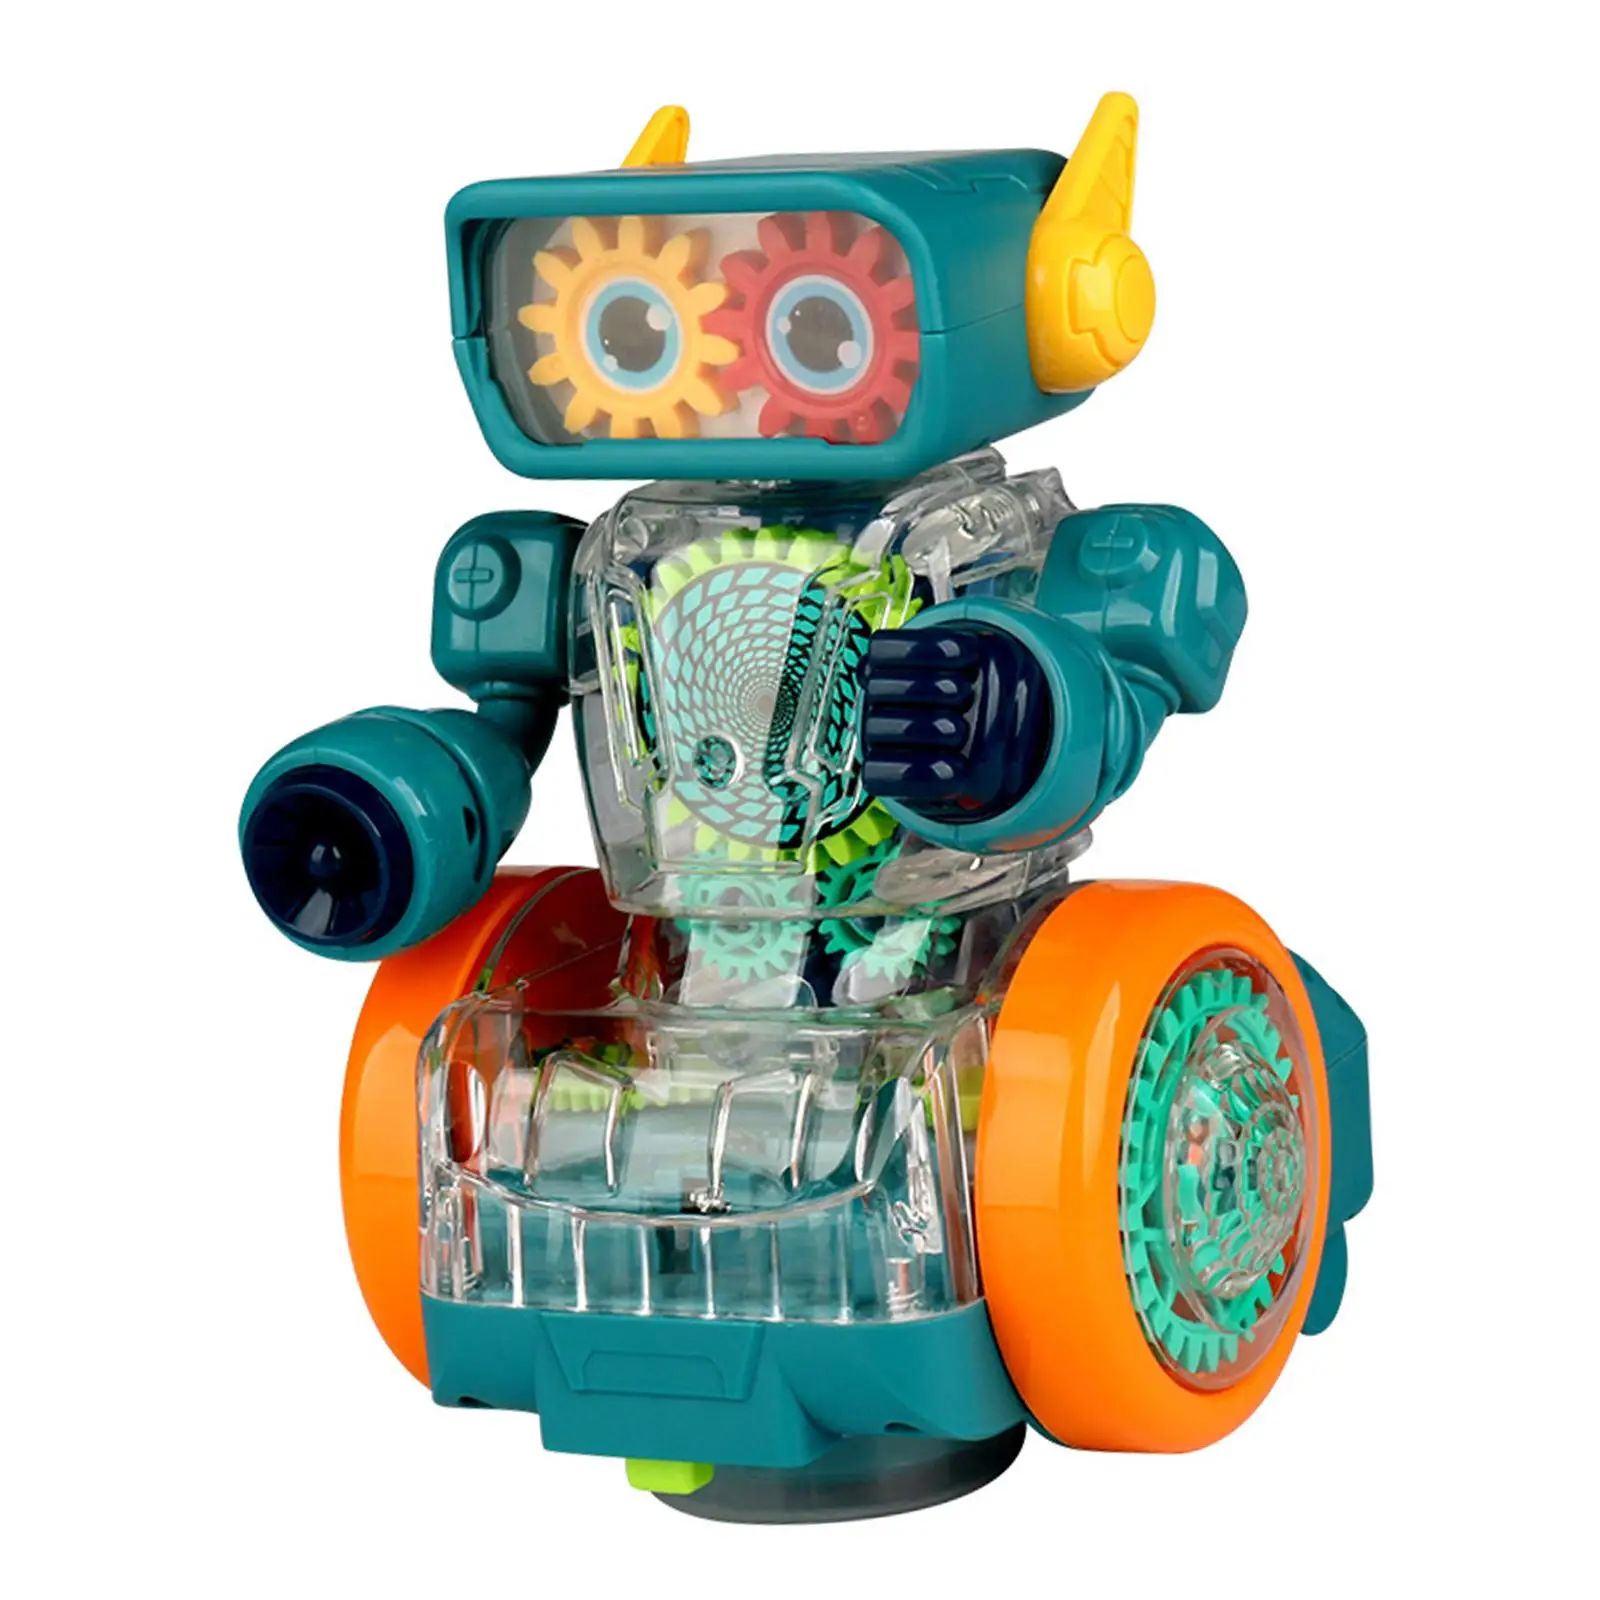 Mechanical Gear Robot Toy with Music with Visible Moving Gears Interactive Toys Gear Toy for Children Boys Kids Gifts